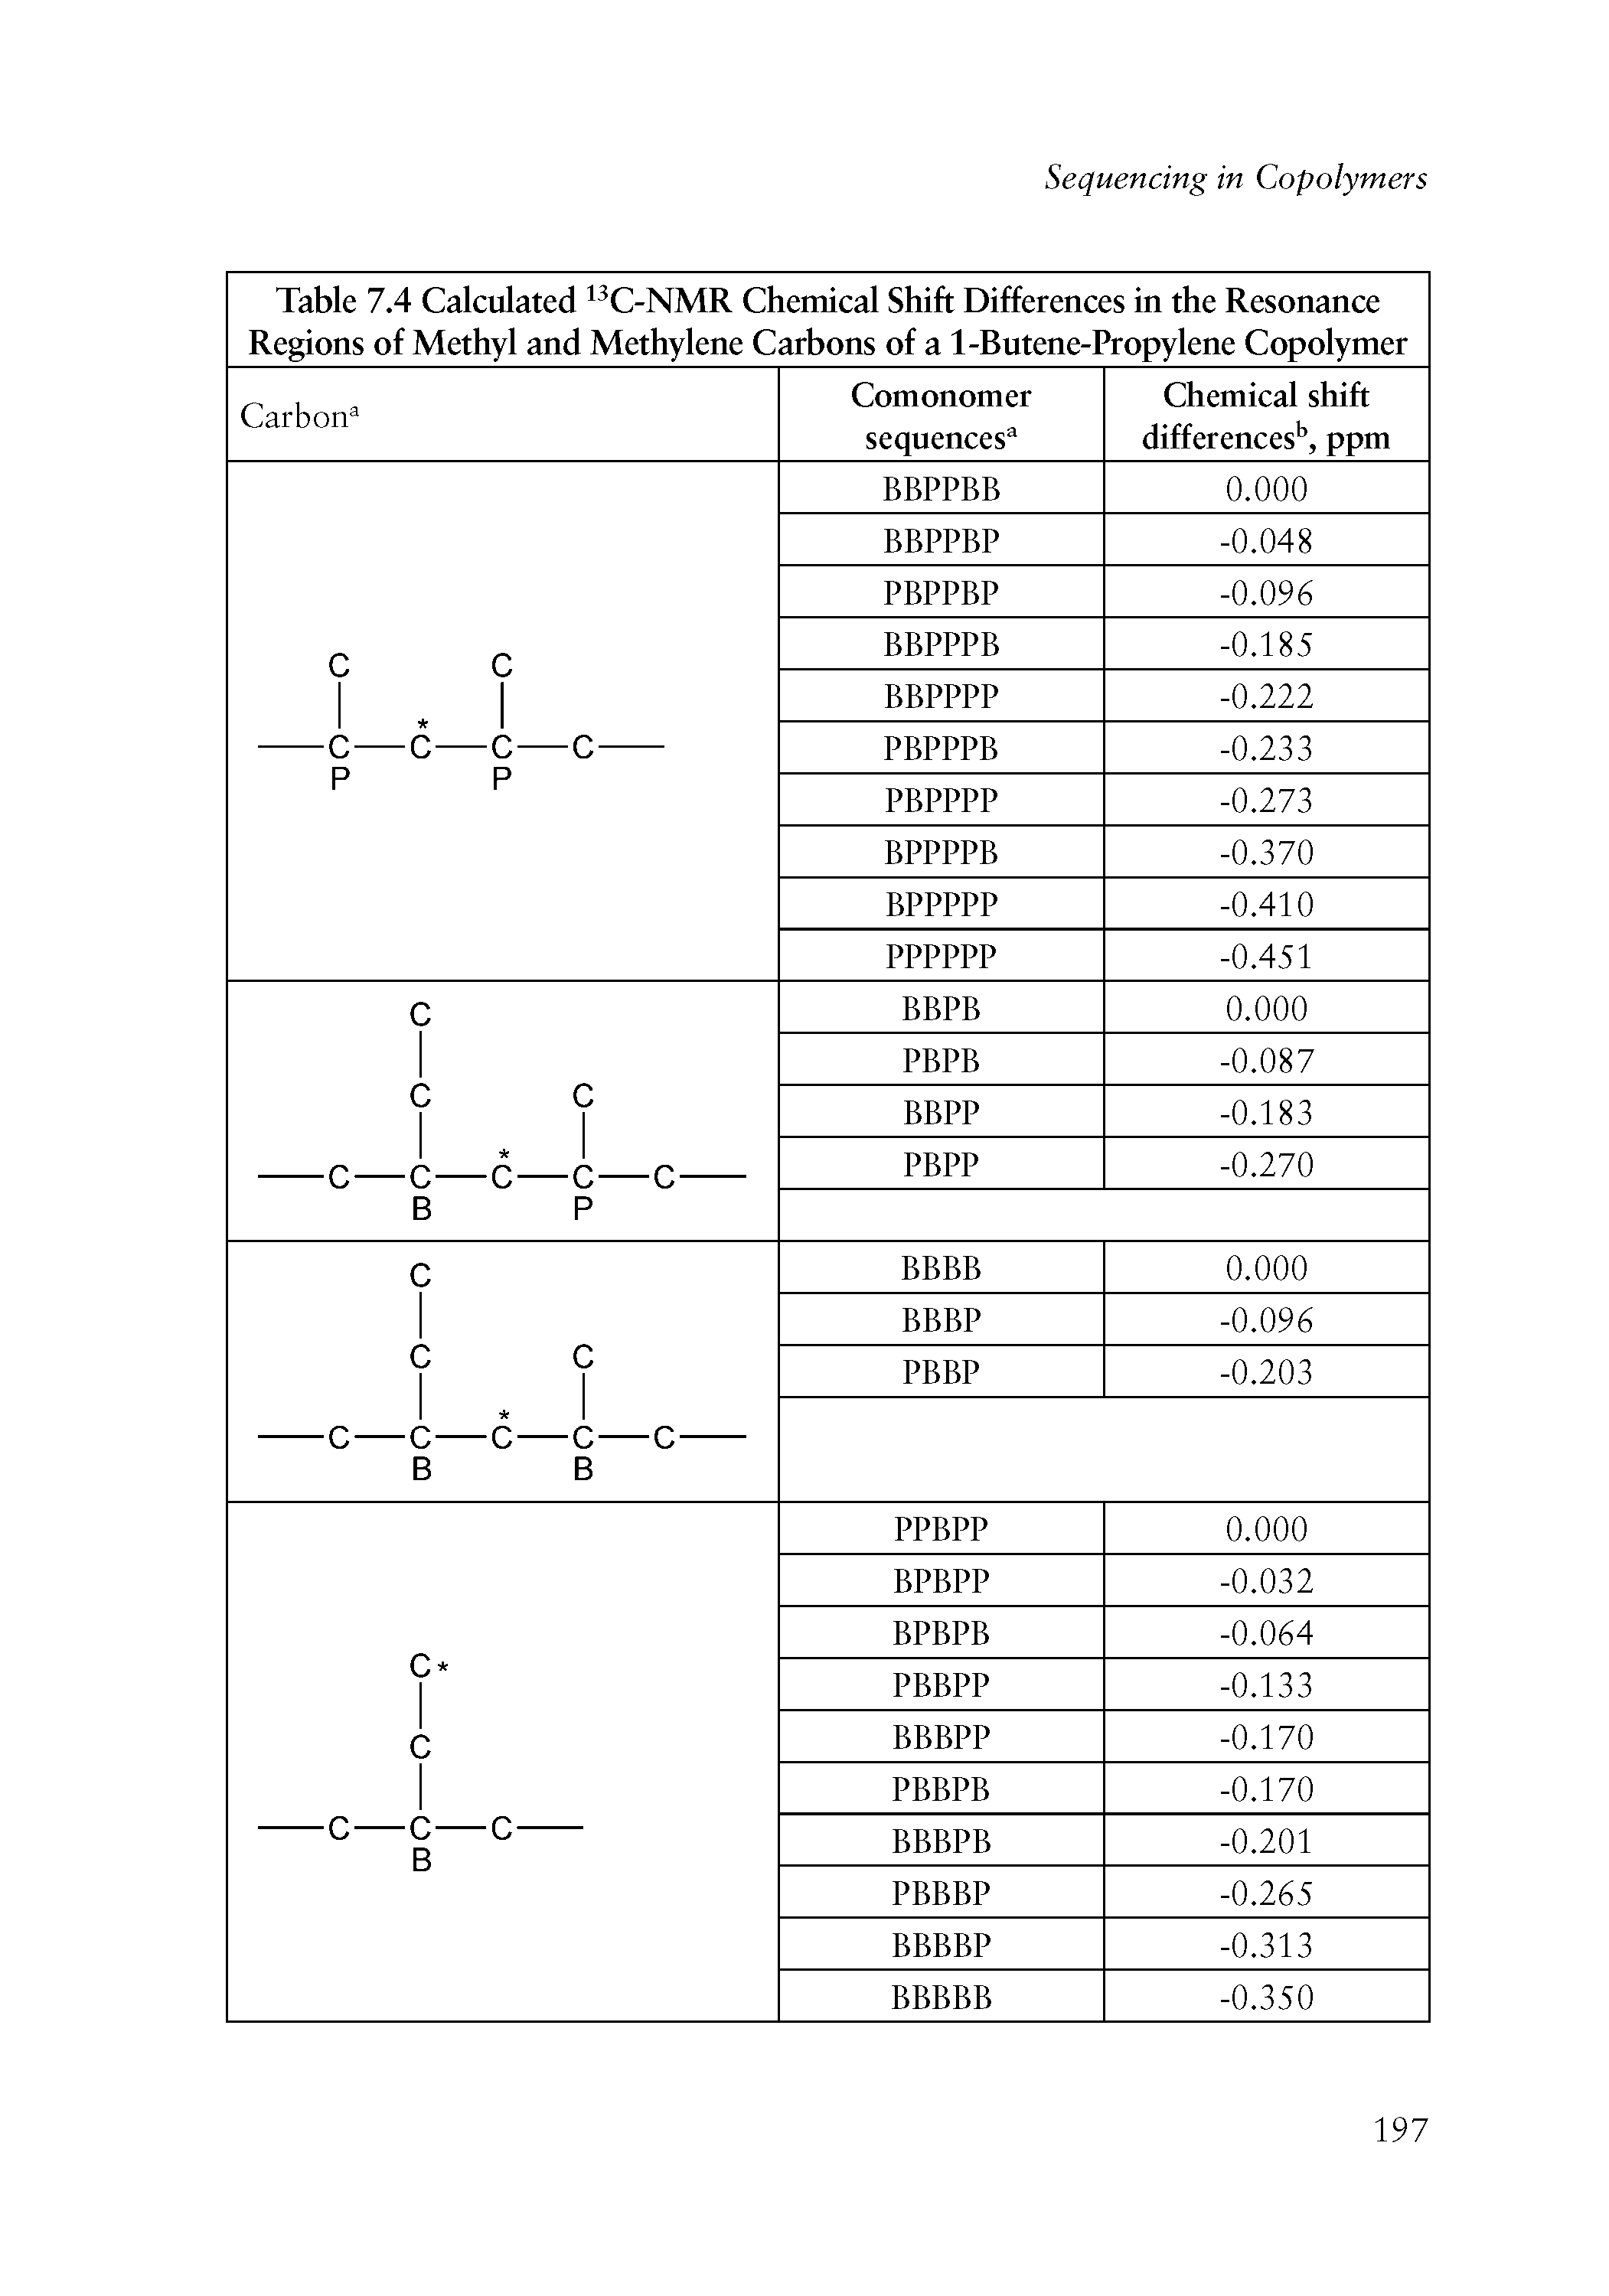 Table 7.4 Calculated C-NMR Chemical Shift Differences in the Resonance Regions of Methyl and Methylene Carbons of a 1-Butene-Propylene Copolymer ...